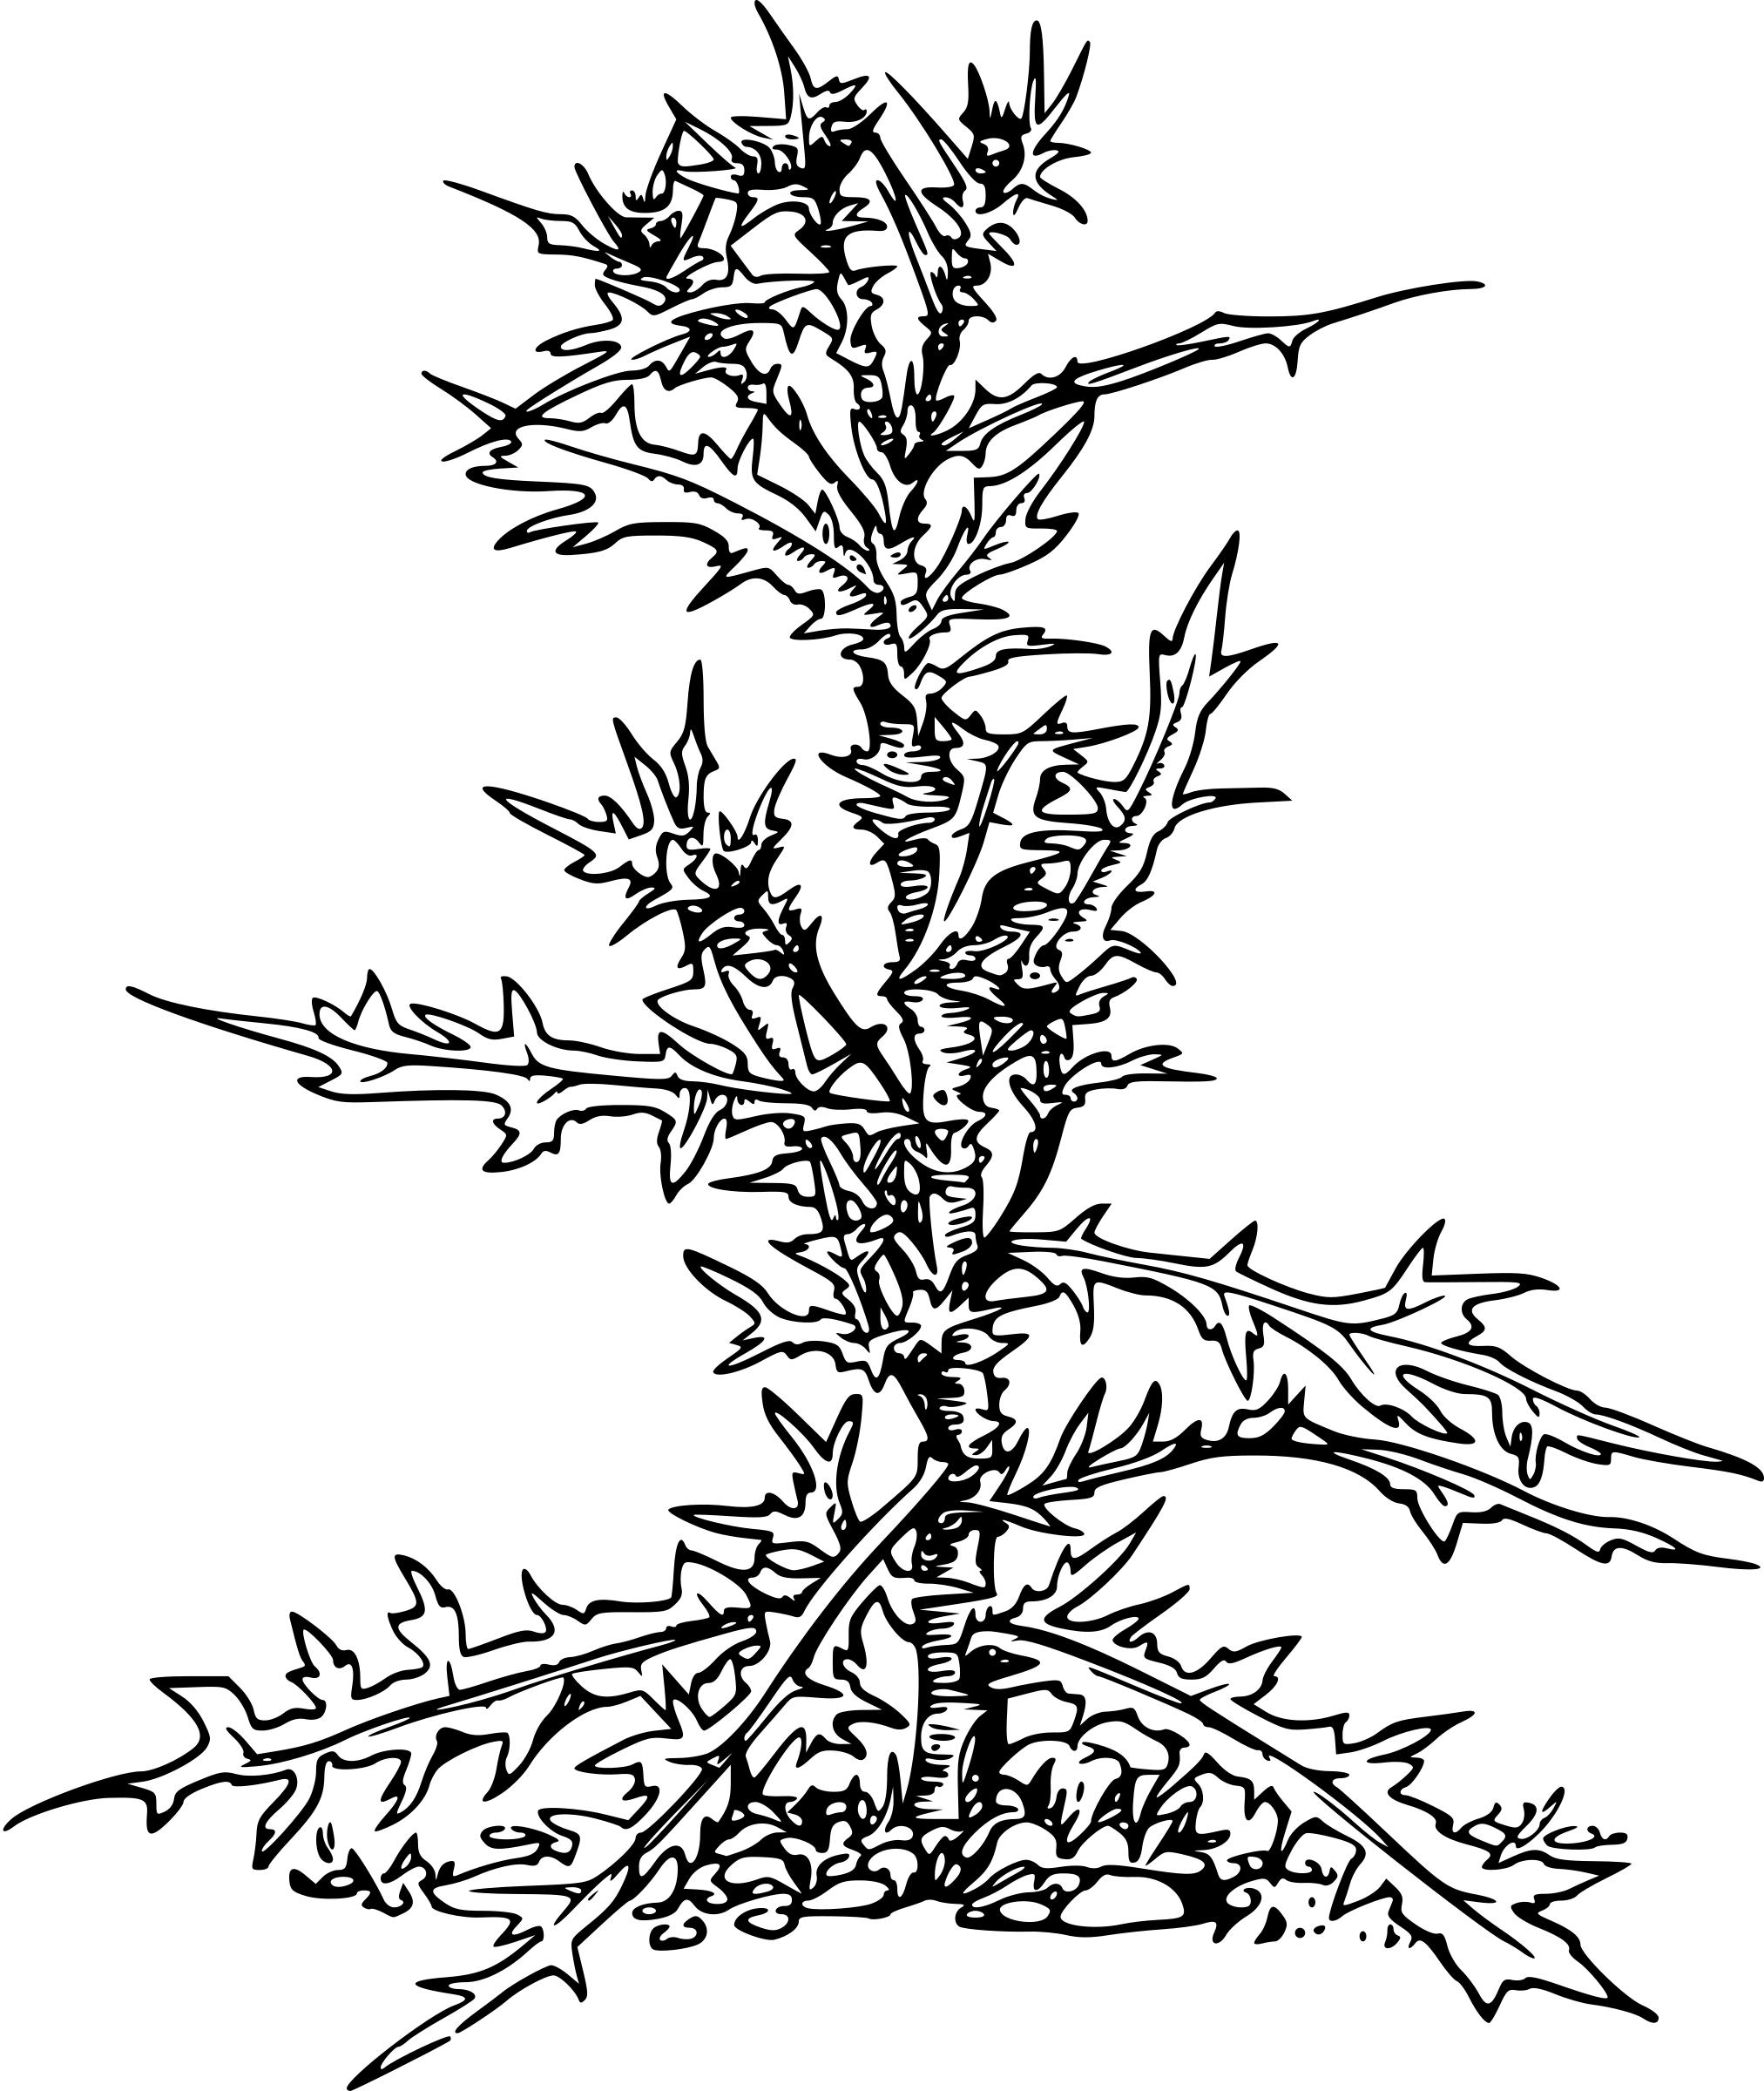 Thistle png